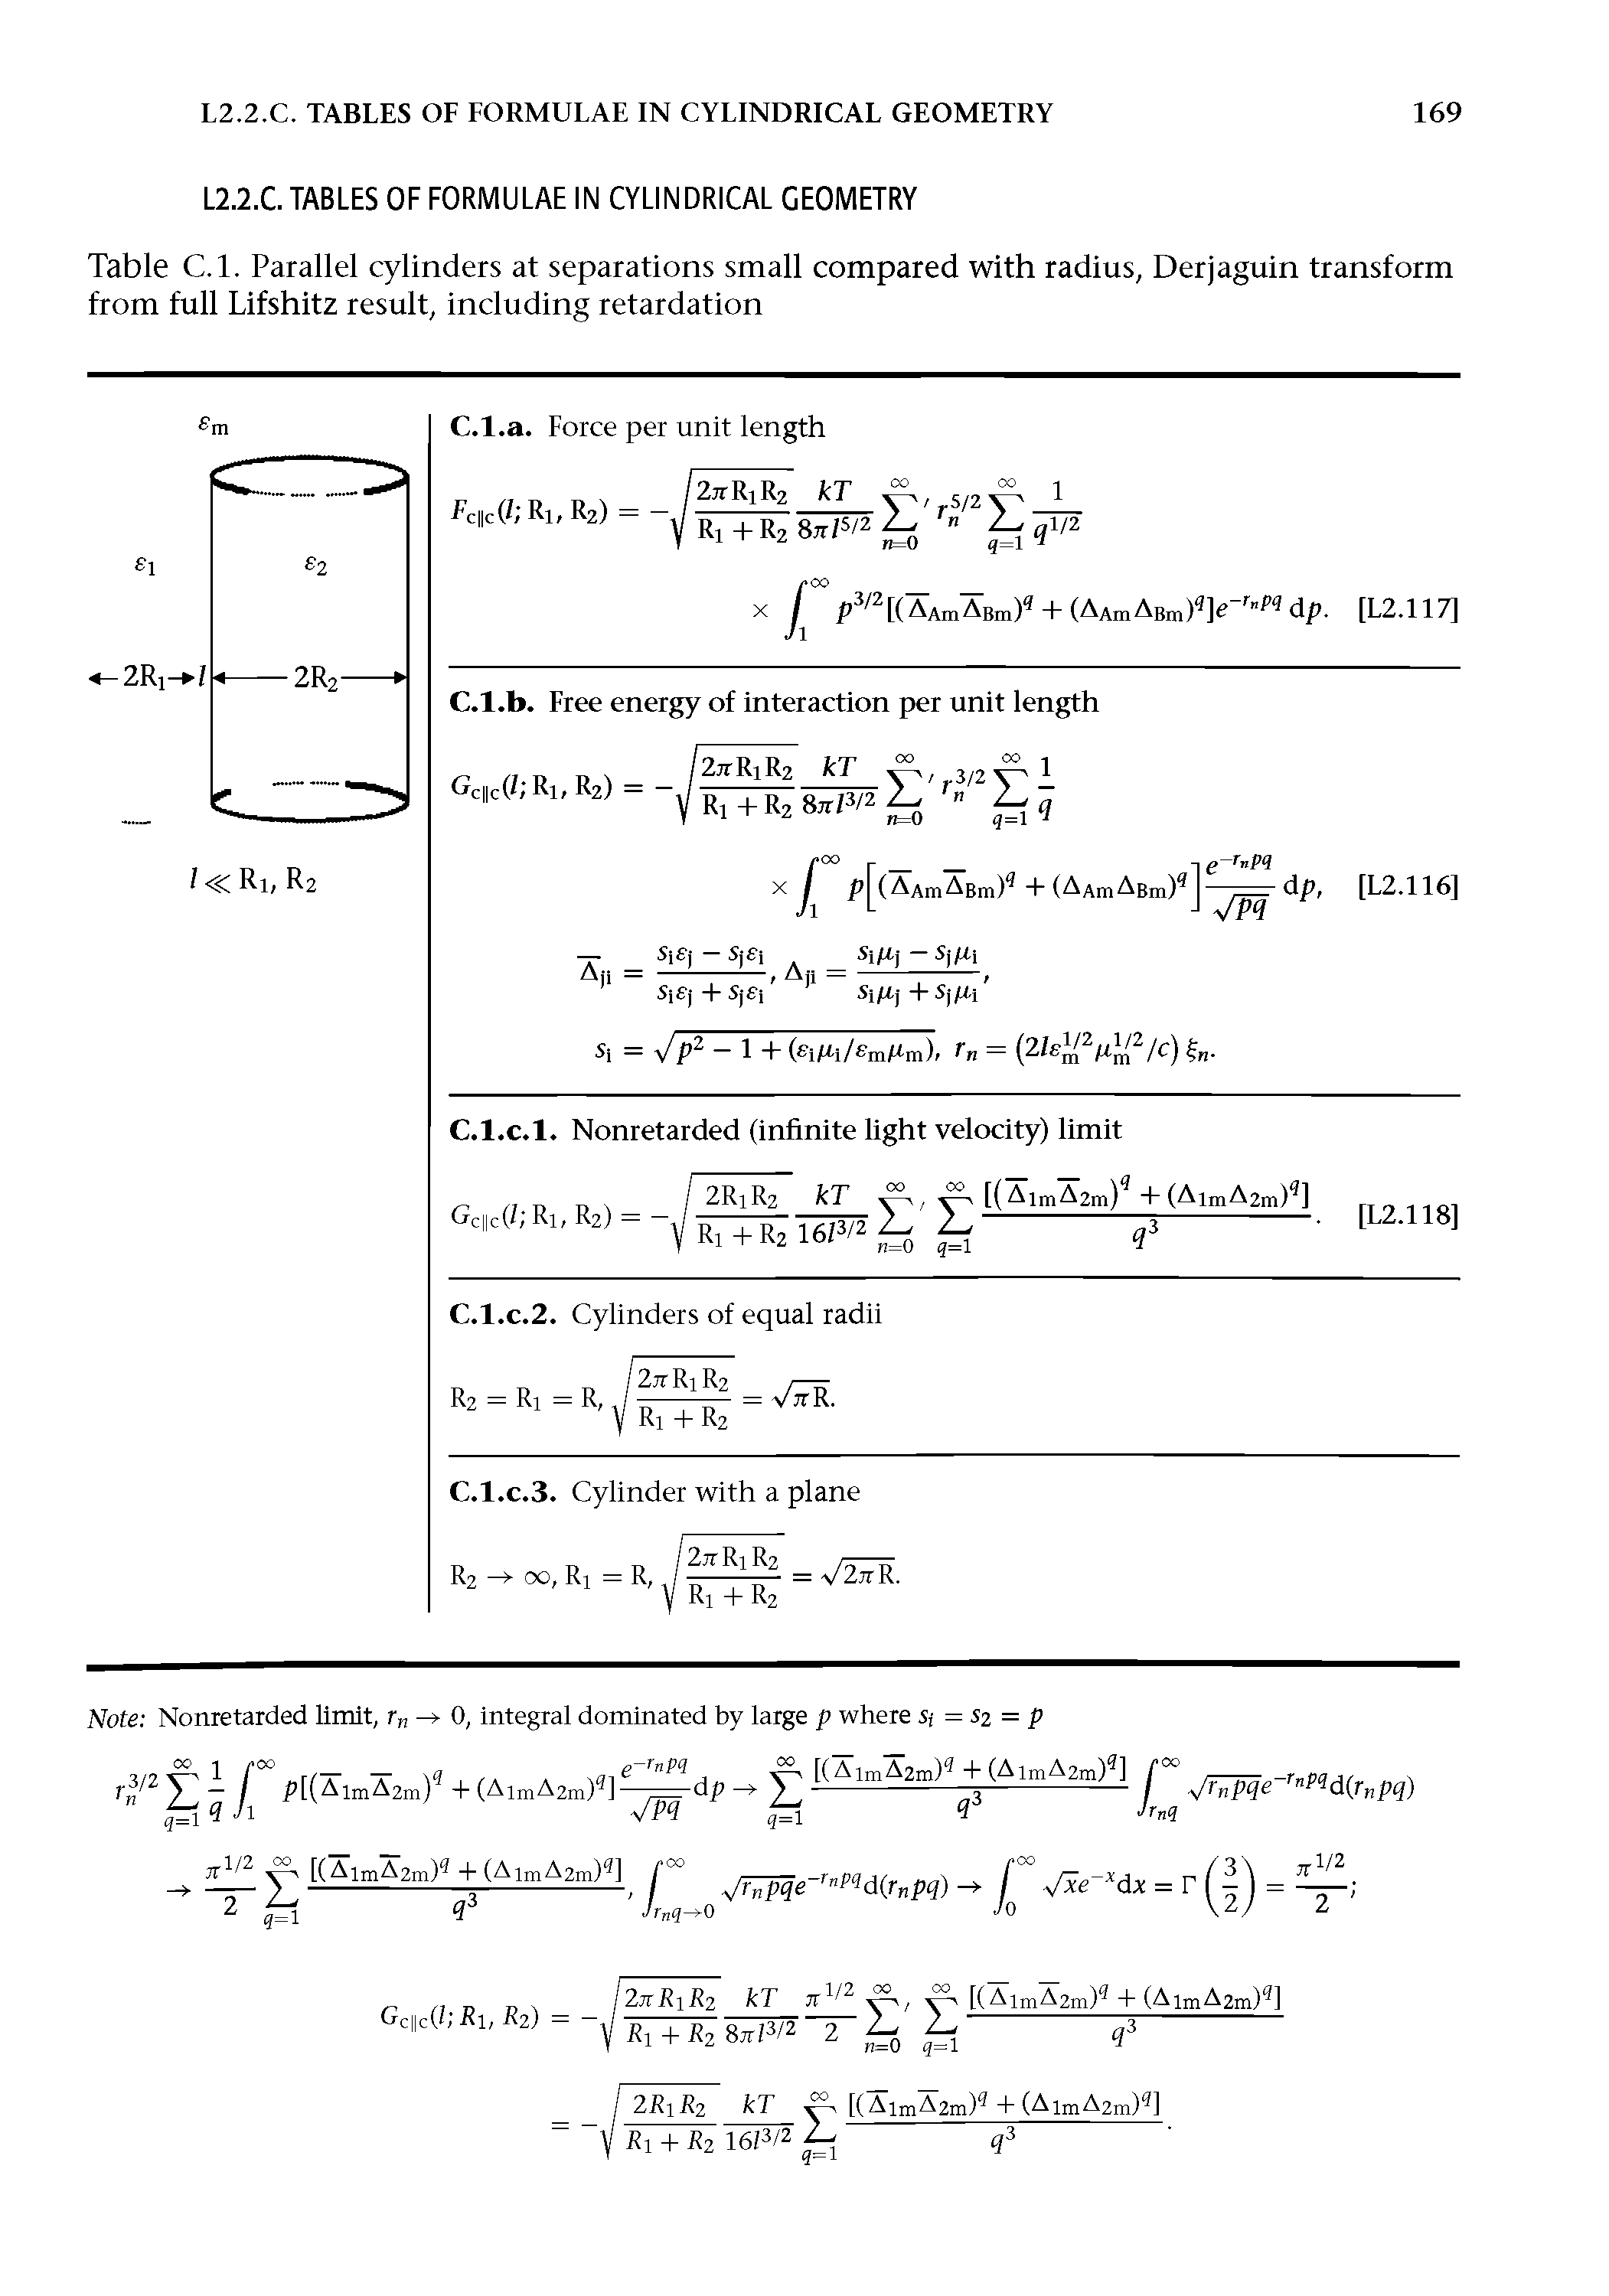 Table C.l. Parallel cylinders at separations small compared with radius, Derjaguin transform from full Lifshitz result, including retardation...